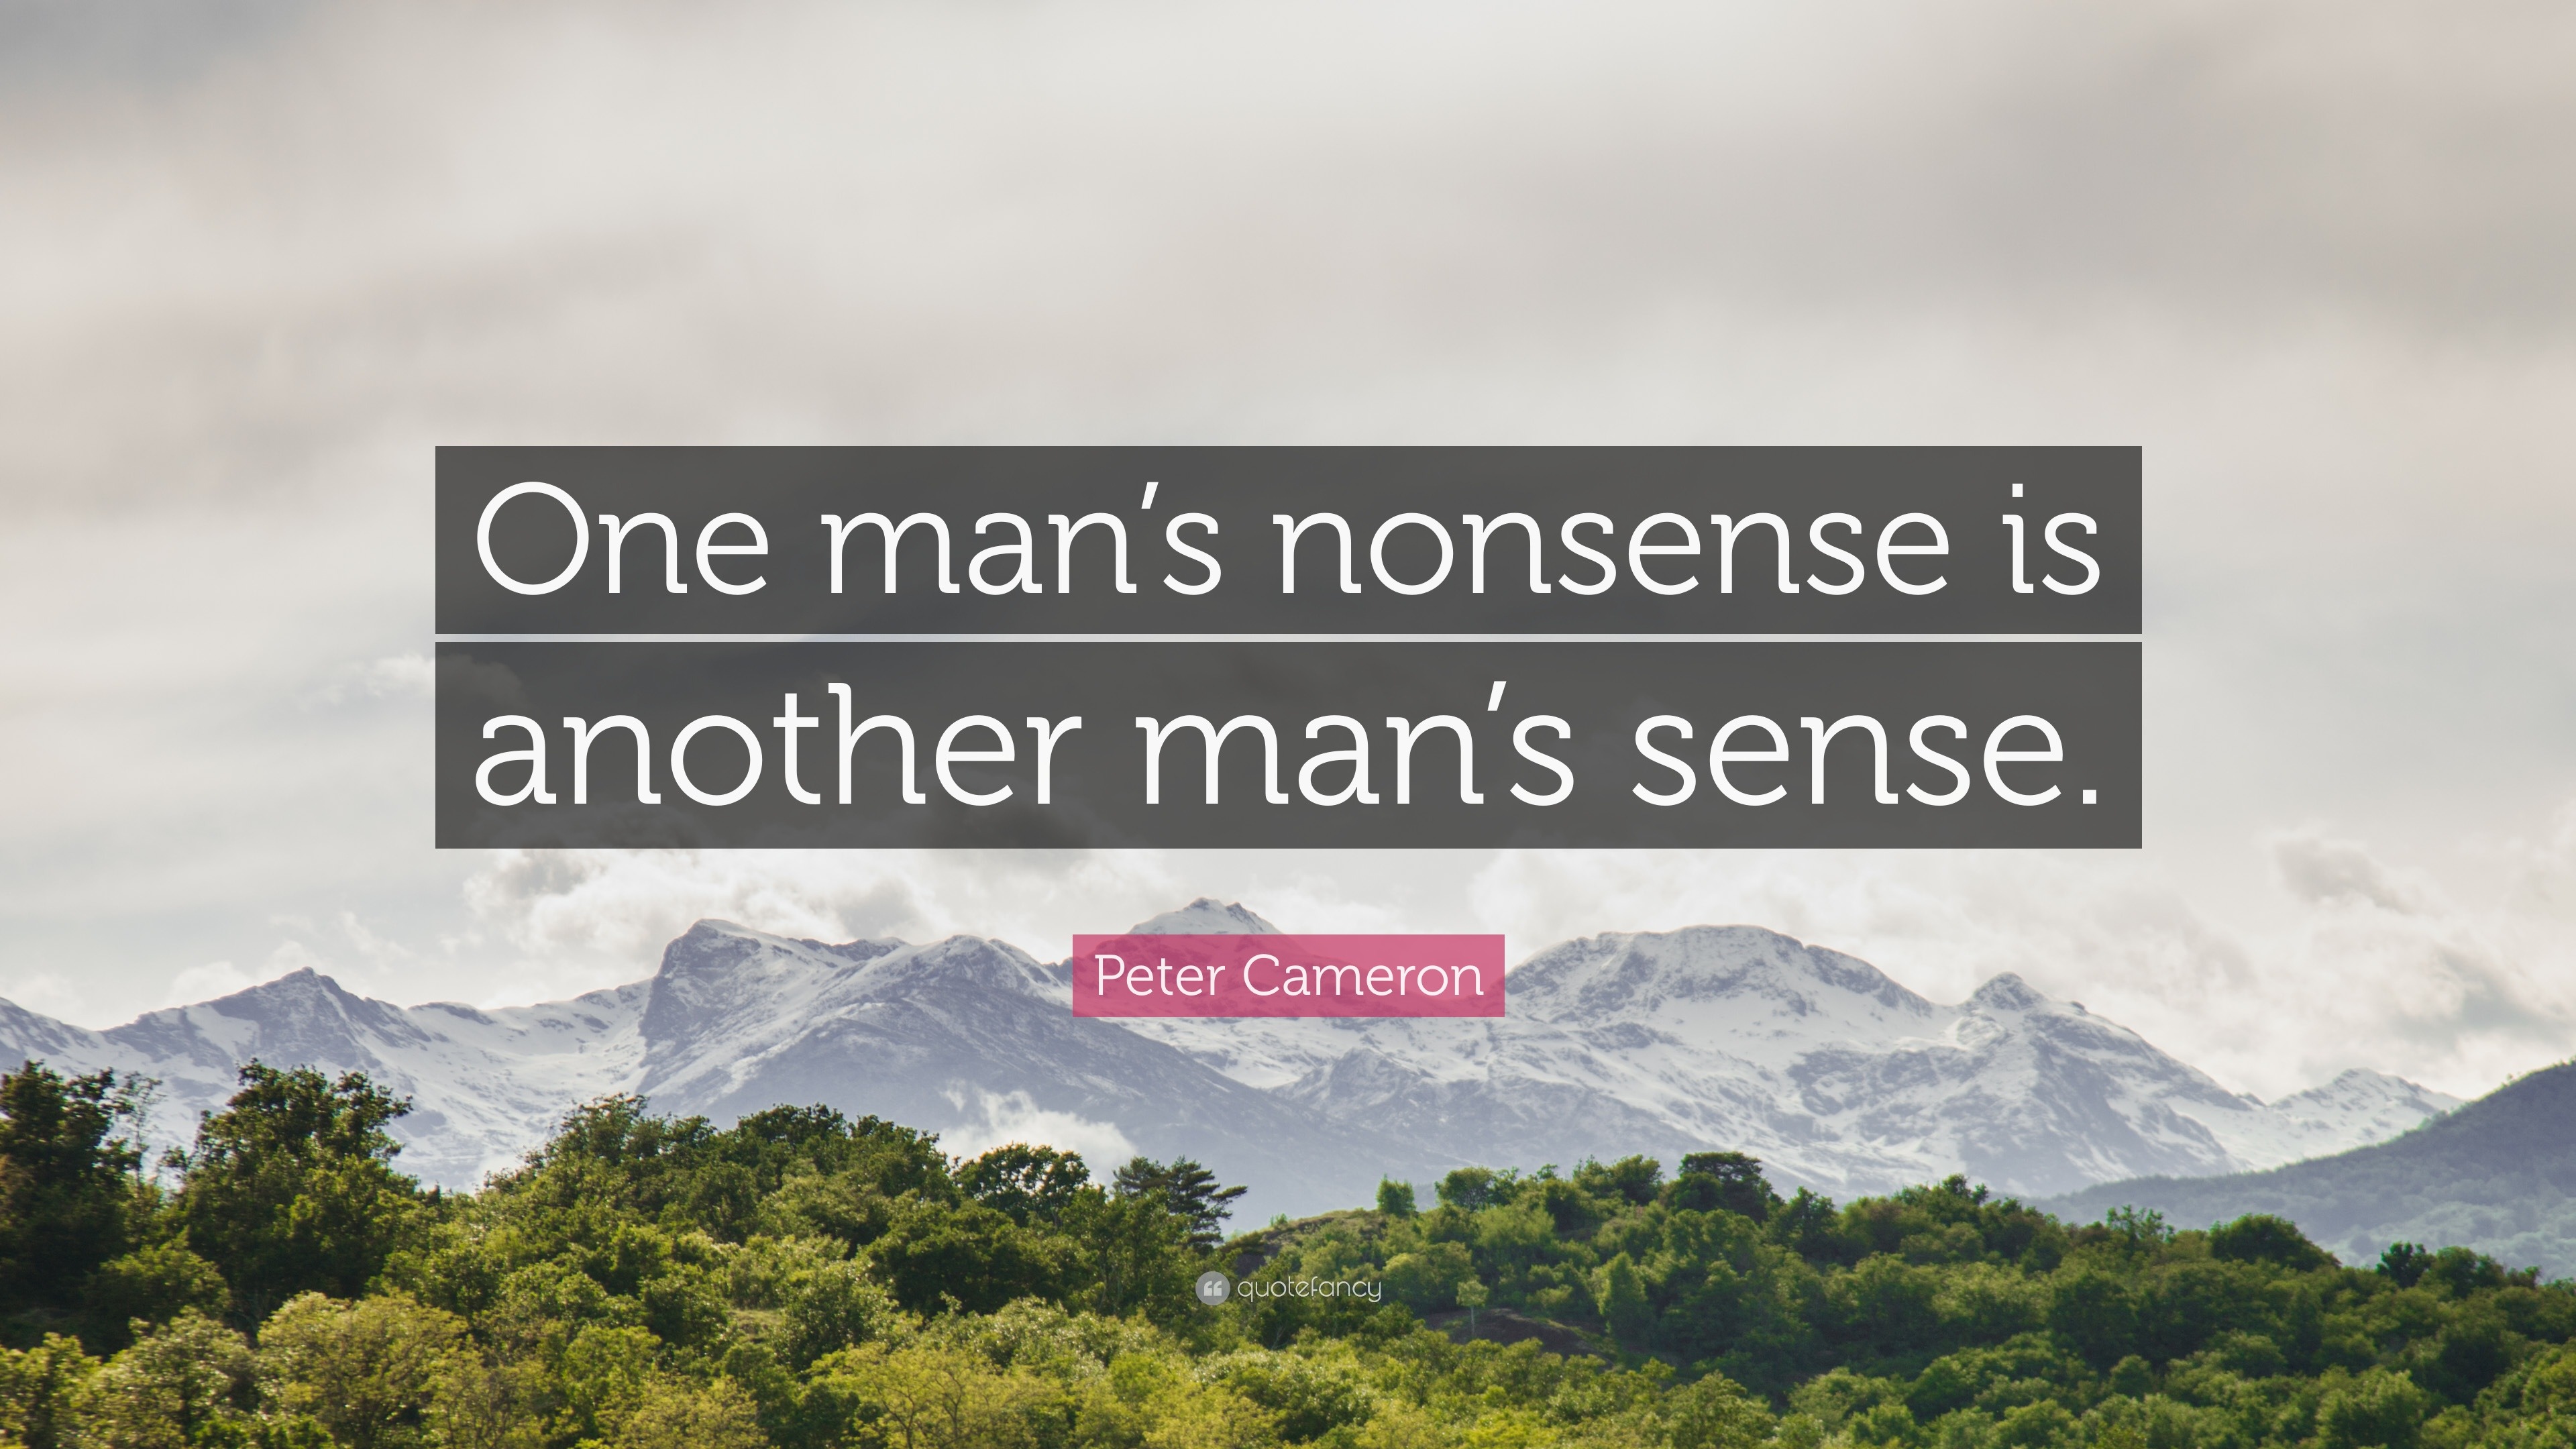 Peter Cameron Quote: “One man's nonsense is another man's sense ...